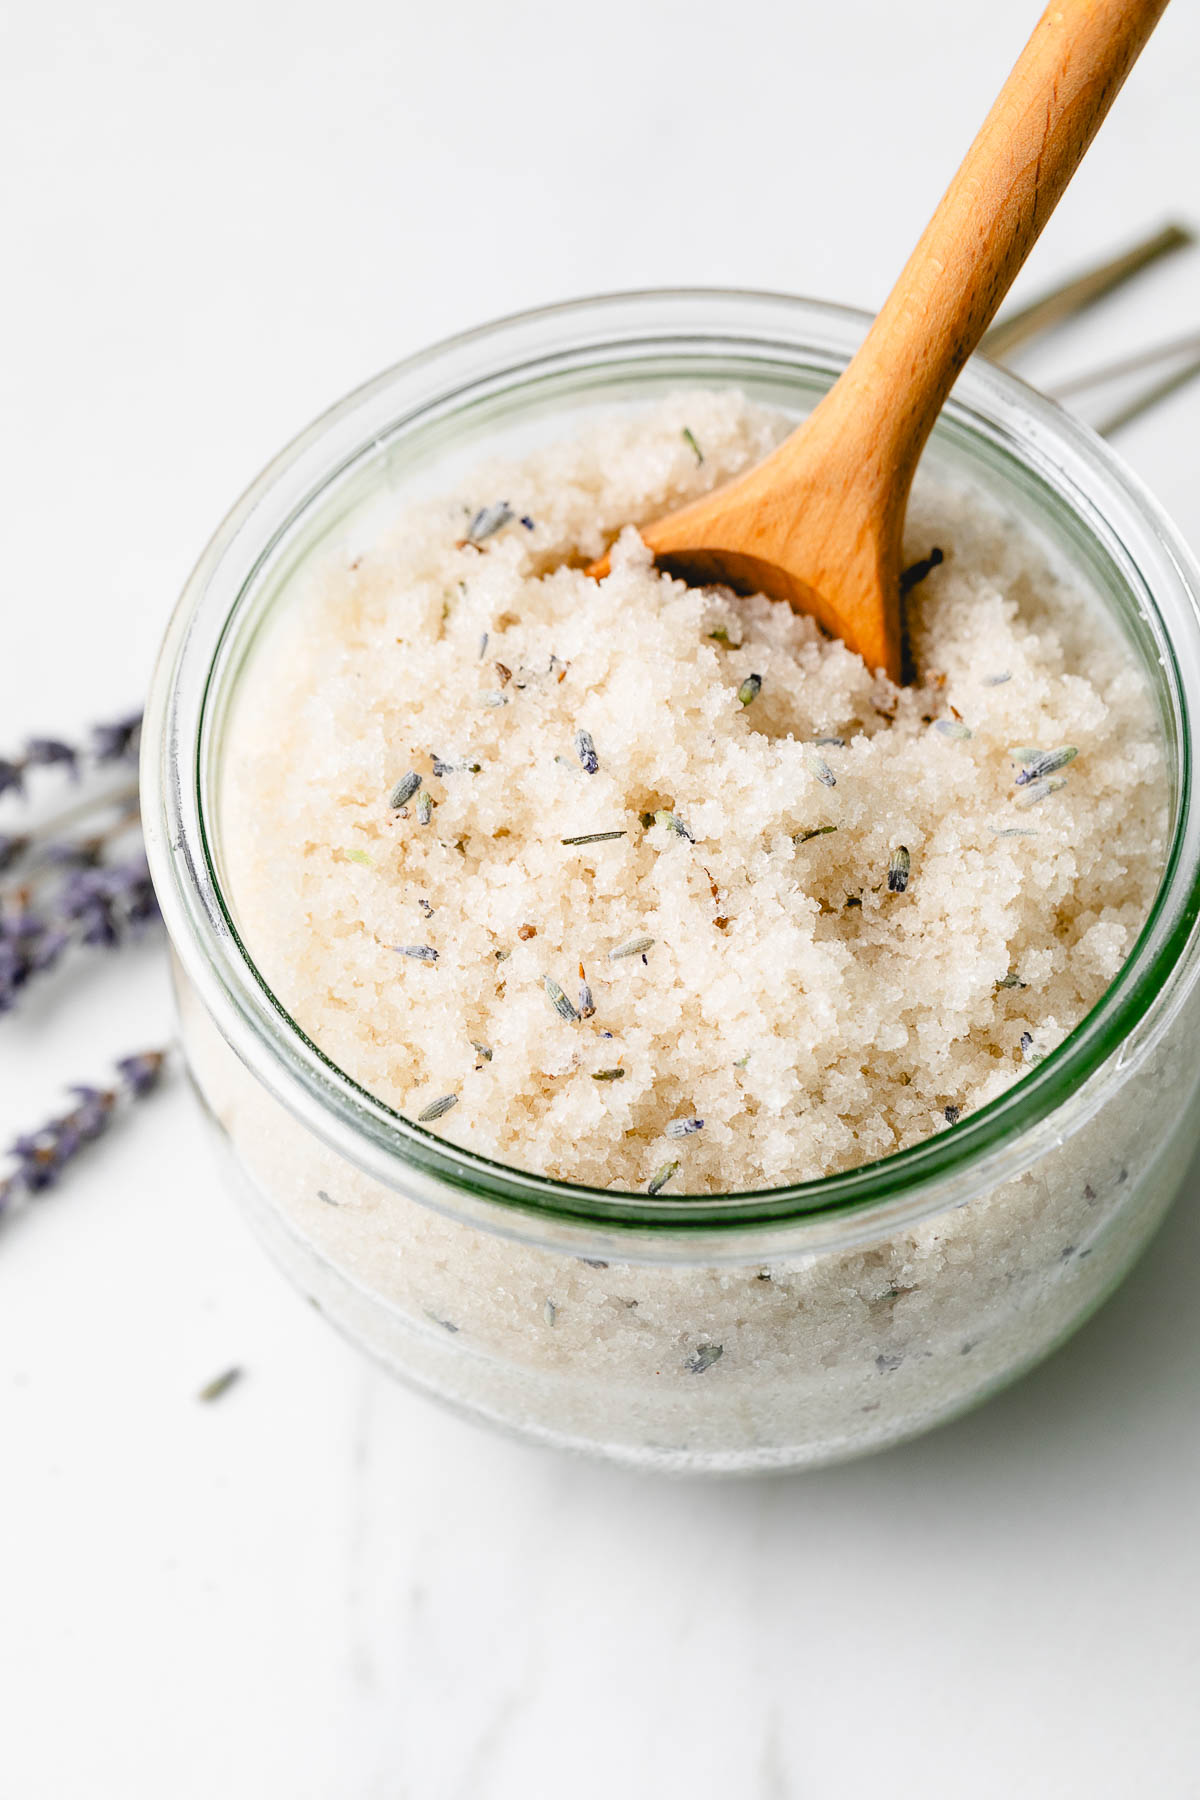 side angle view of lavender body scrub in a glass jar with wood spoon.